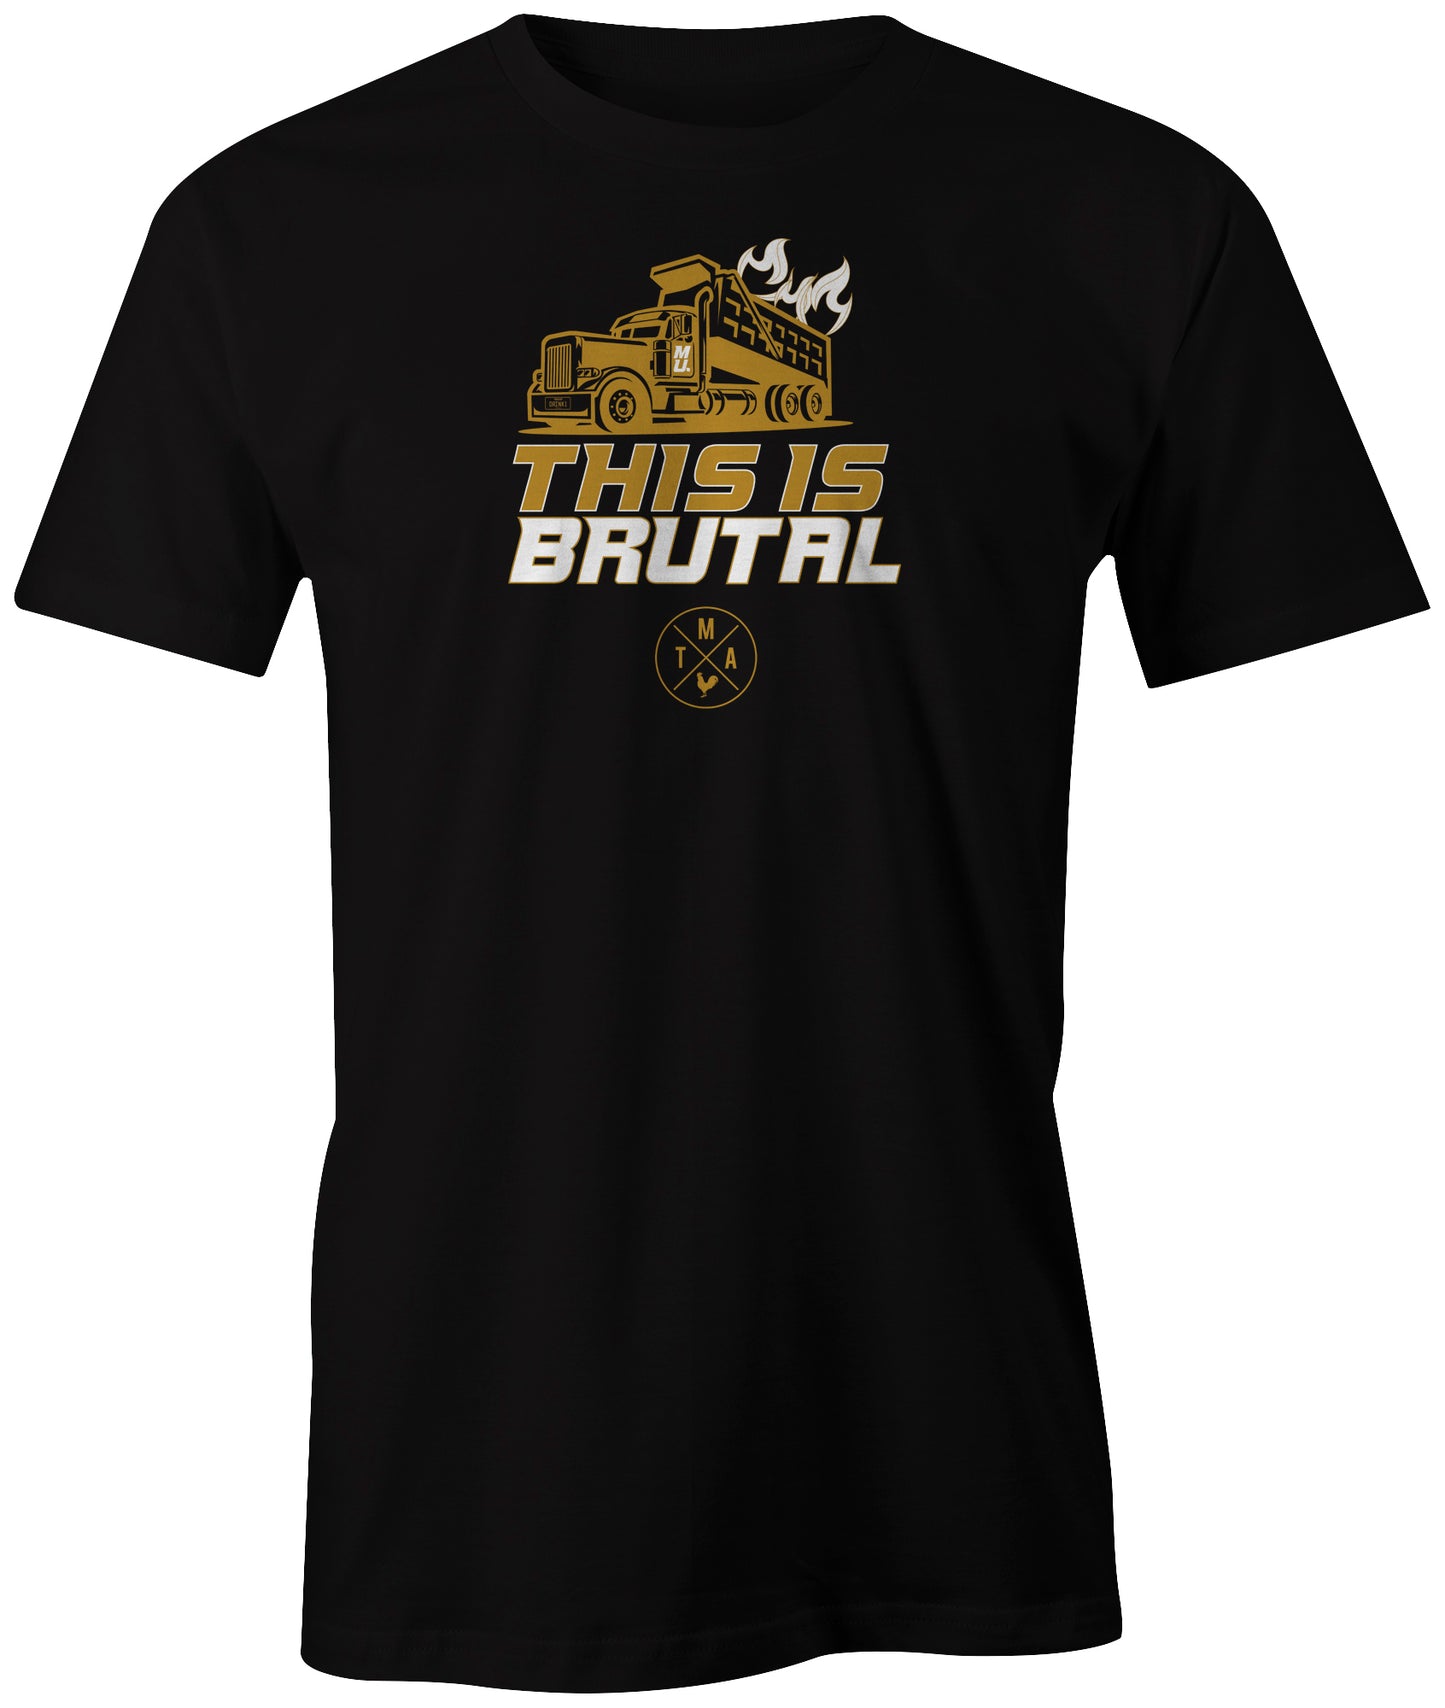 This Is Brutal Shirt